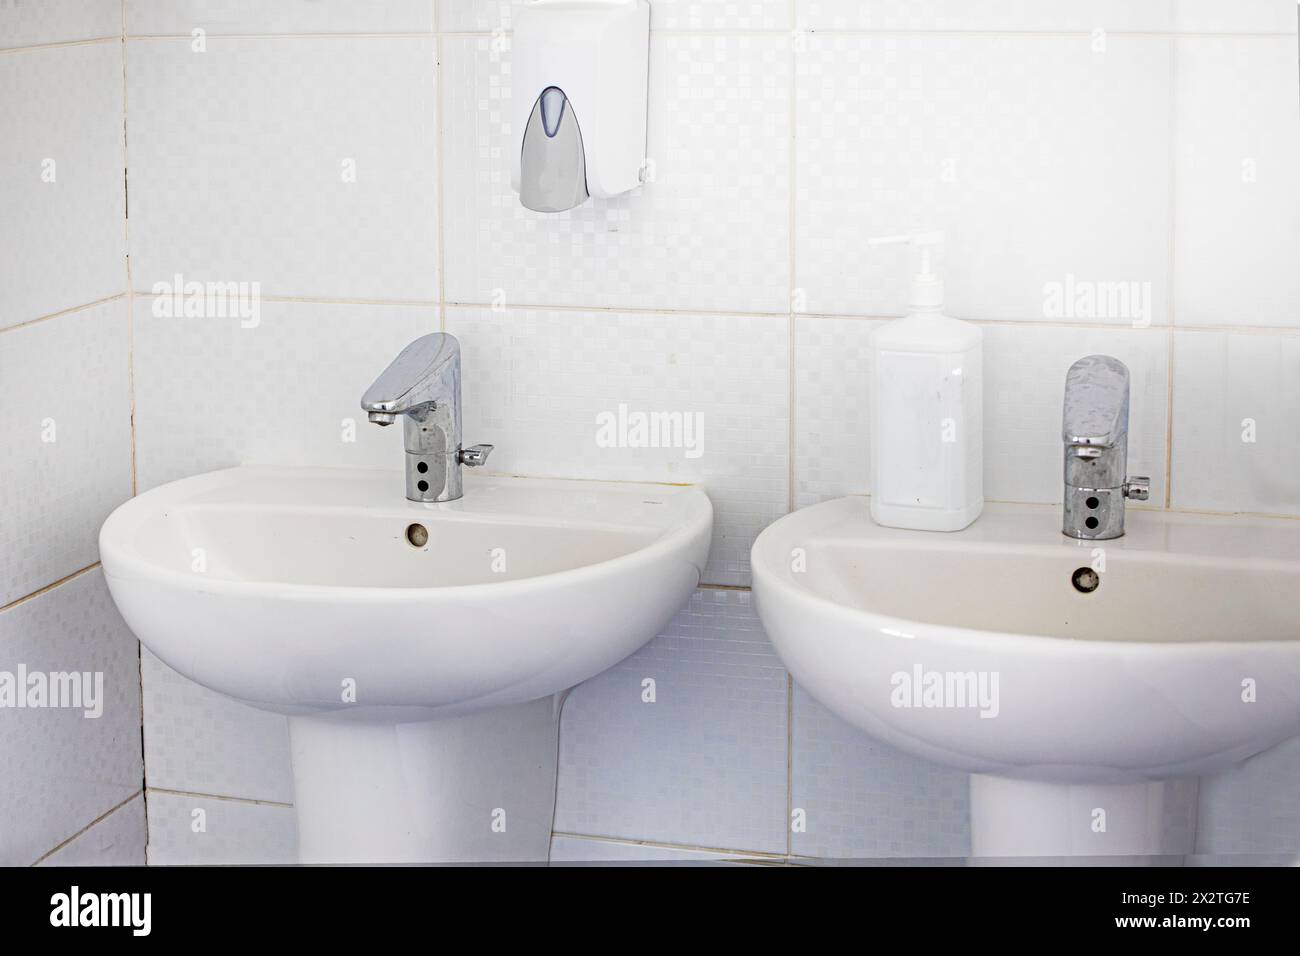 white sinks and faucets in the bathroom. modern design Stock Photo